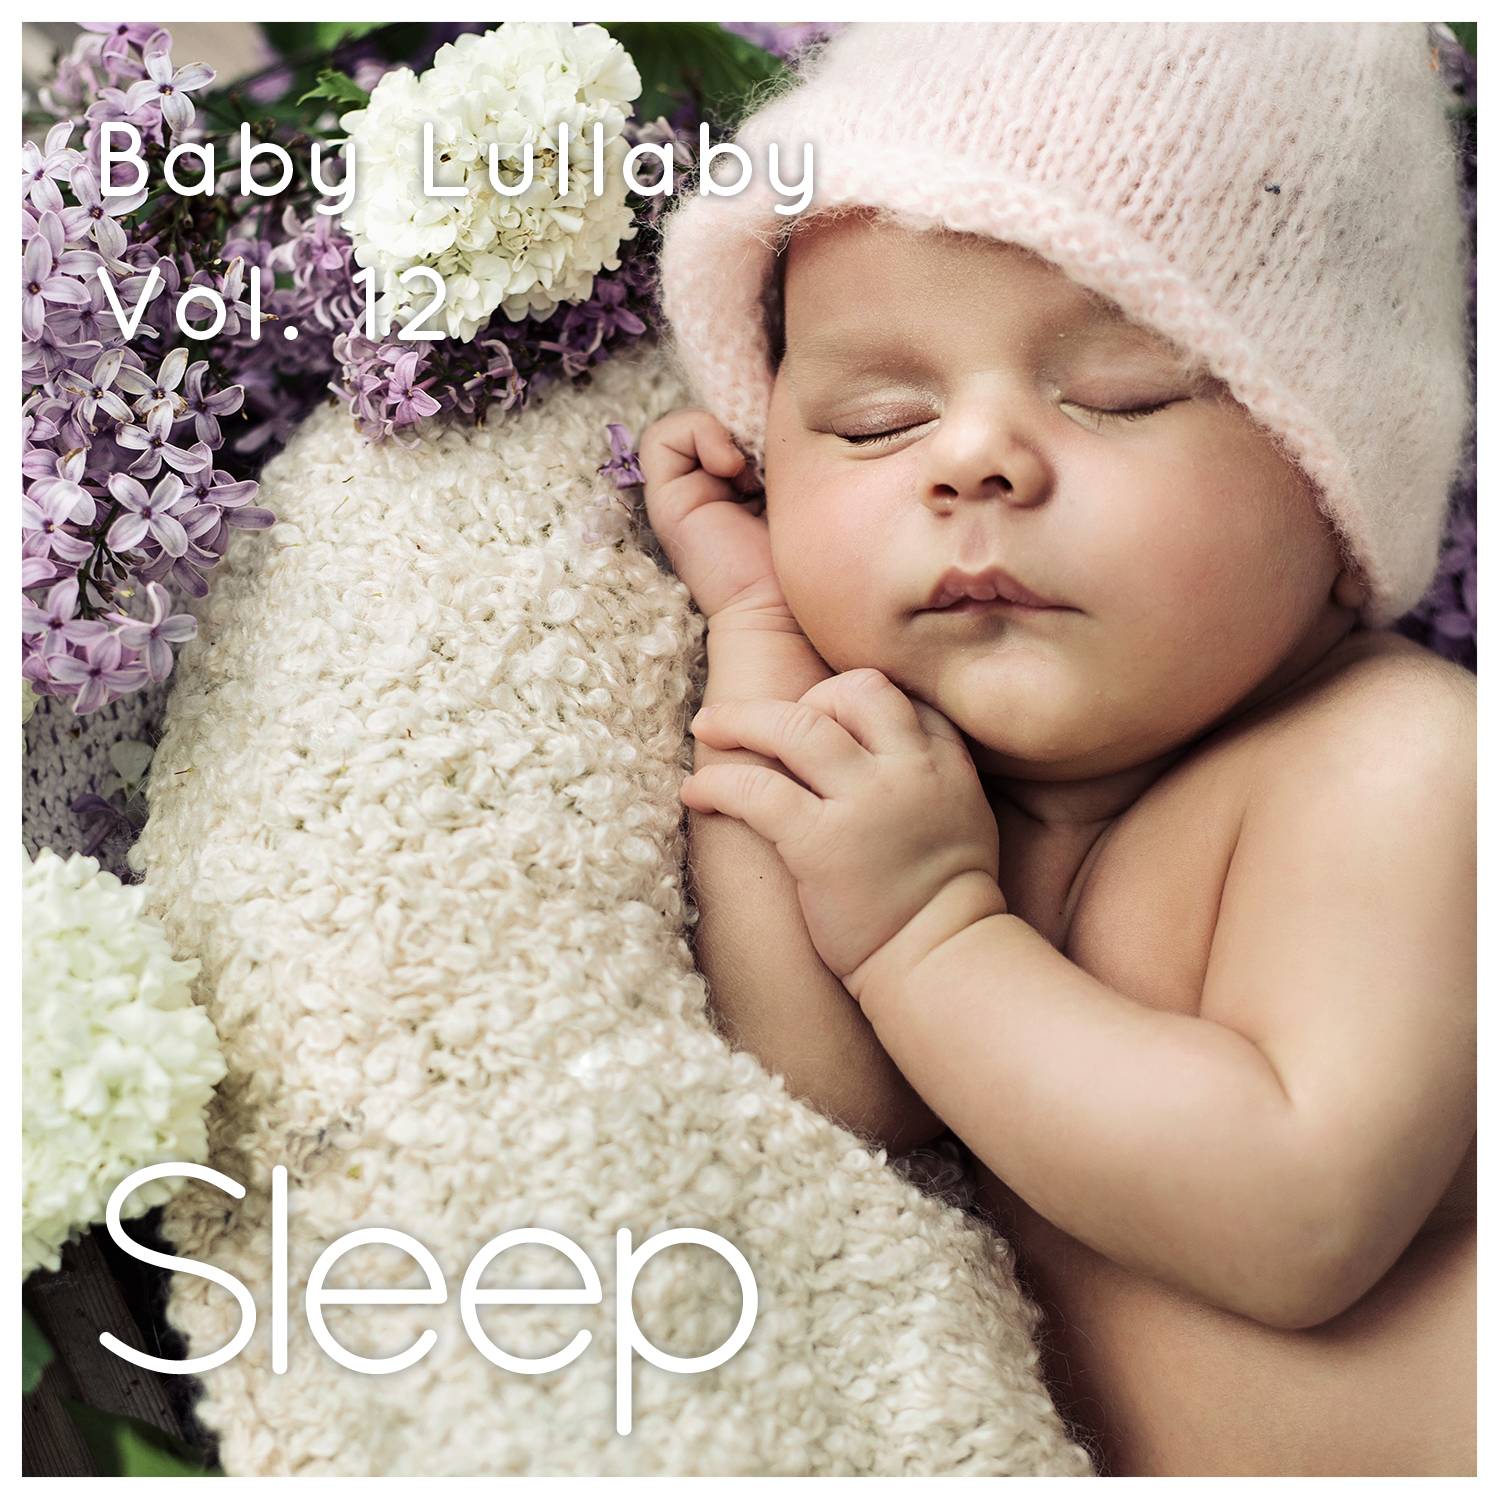 Baby Sleep Ambient Lullaby, Pt. 60